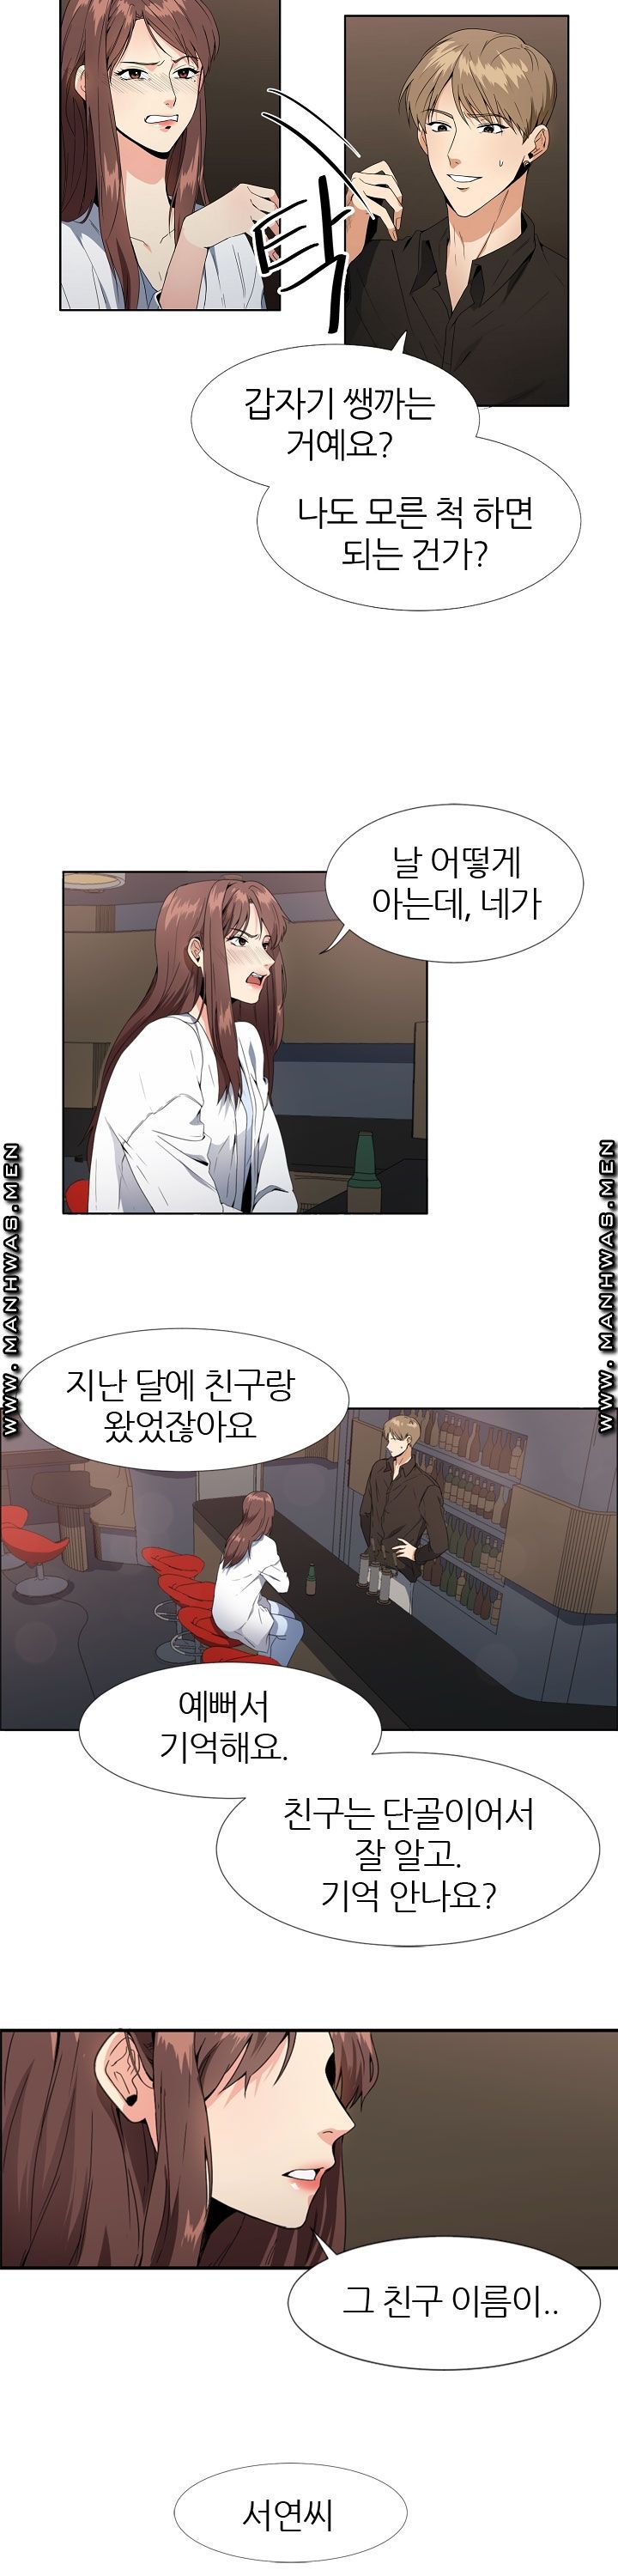 Memory of July Raw - Chapter 1 Page 11